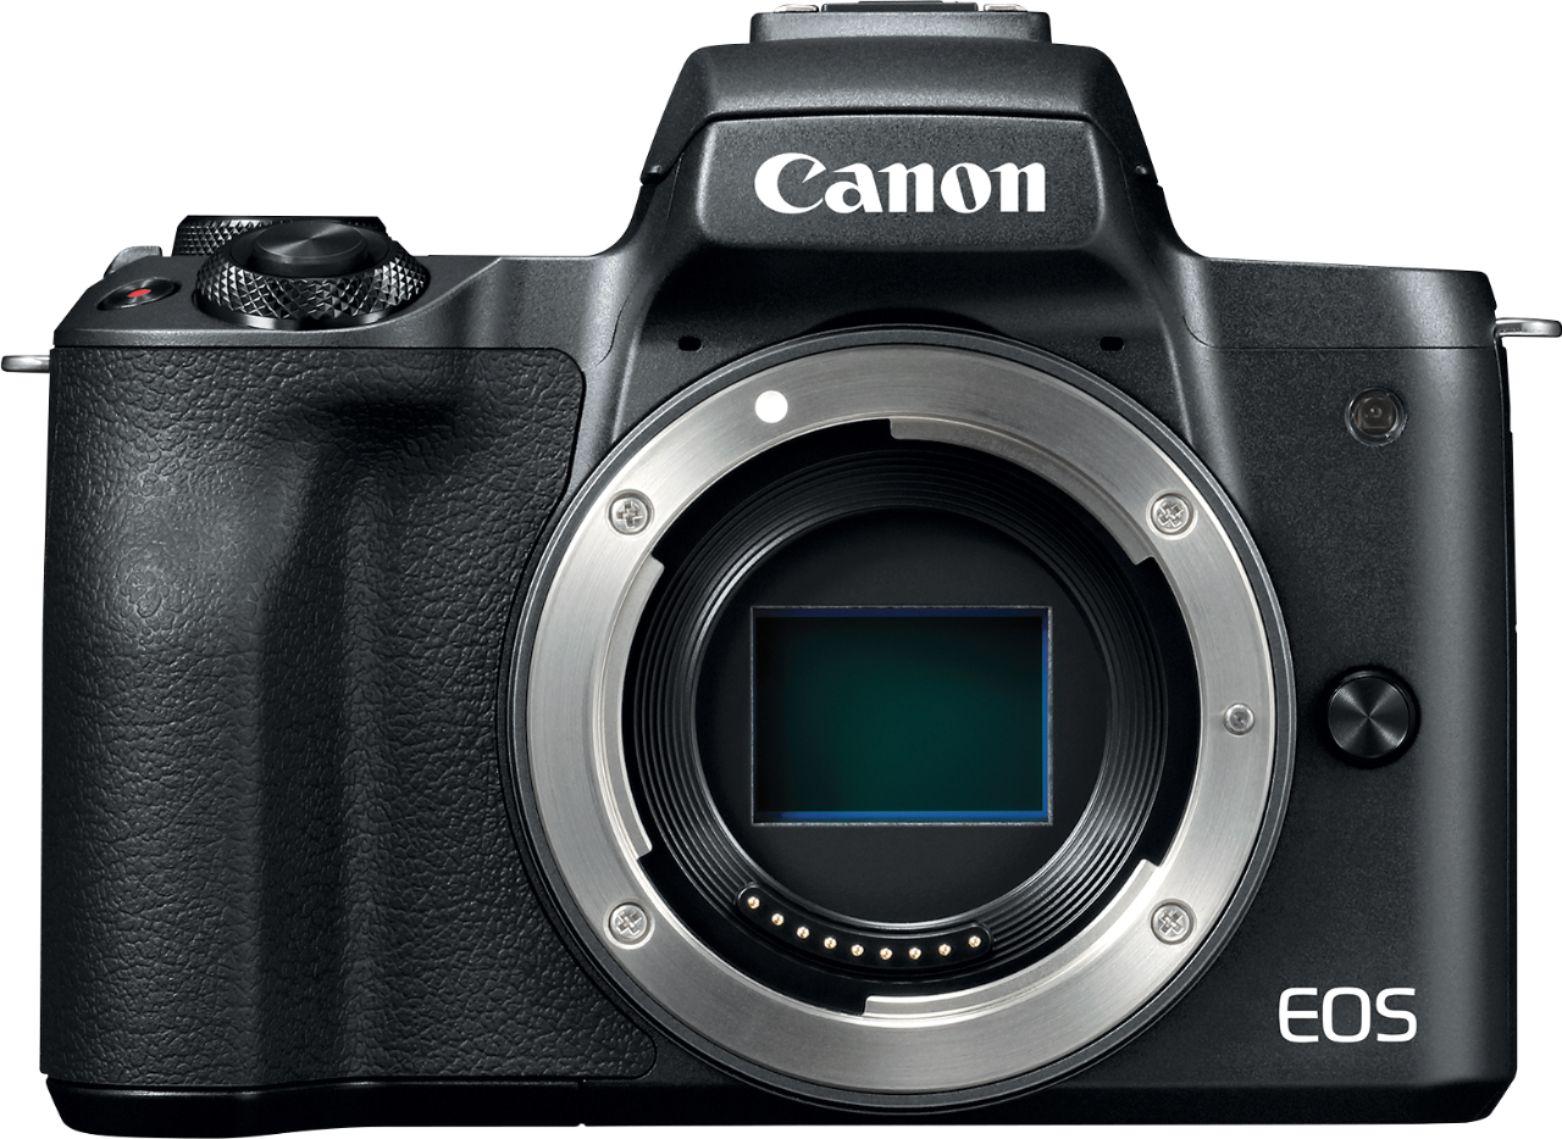 Canon EOS M50 Mirrorless Digital Camera for $459.99 Shipped